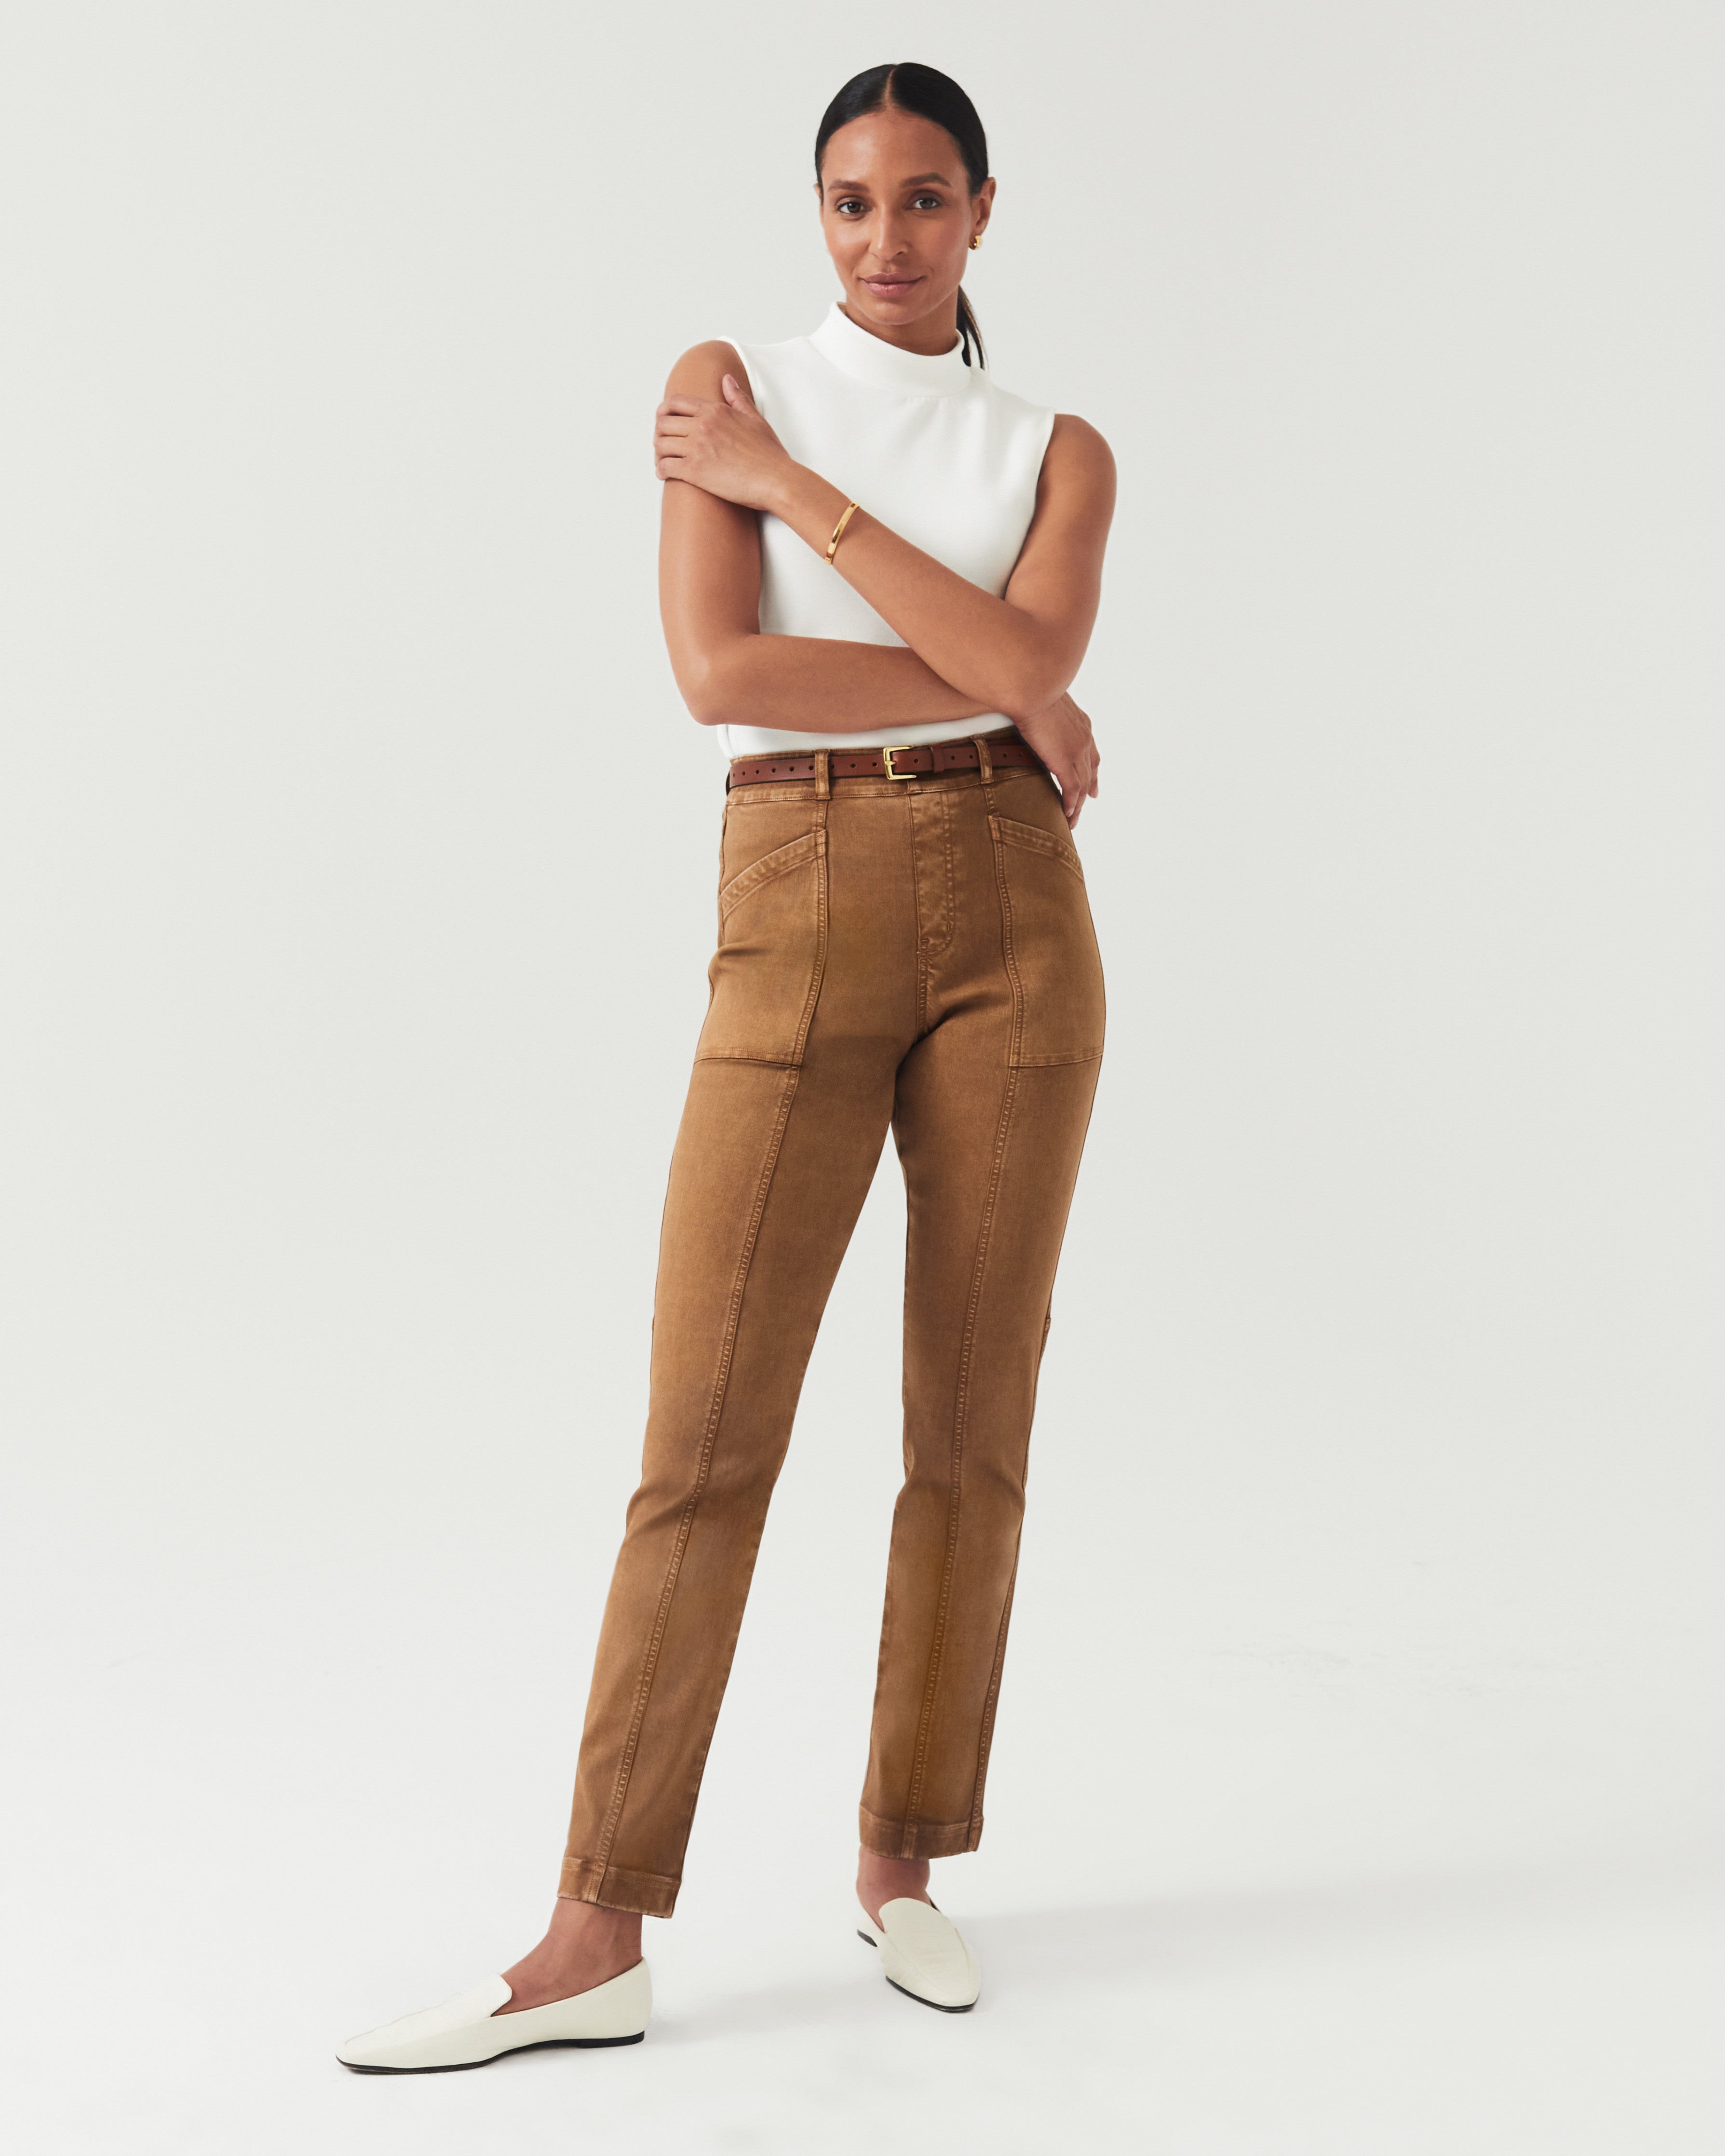 Chic Women's Plus Stretch Twill Pull On Pant